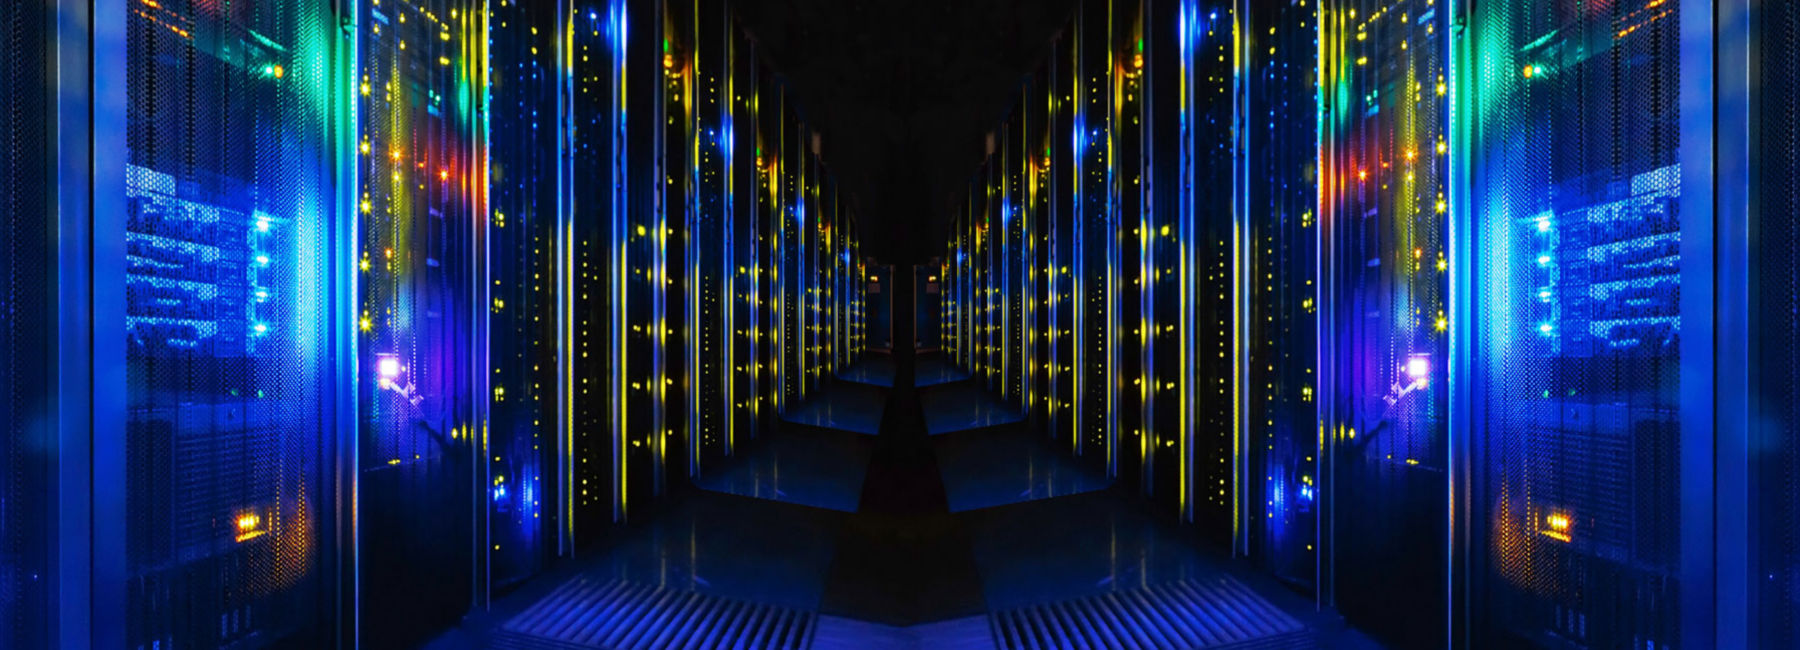 Modernising your mainframe? Here’s how to do cloud the right way